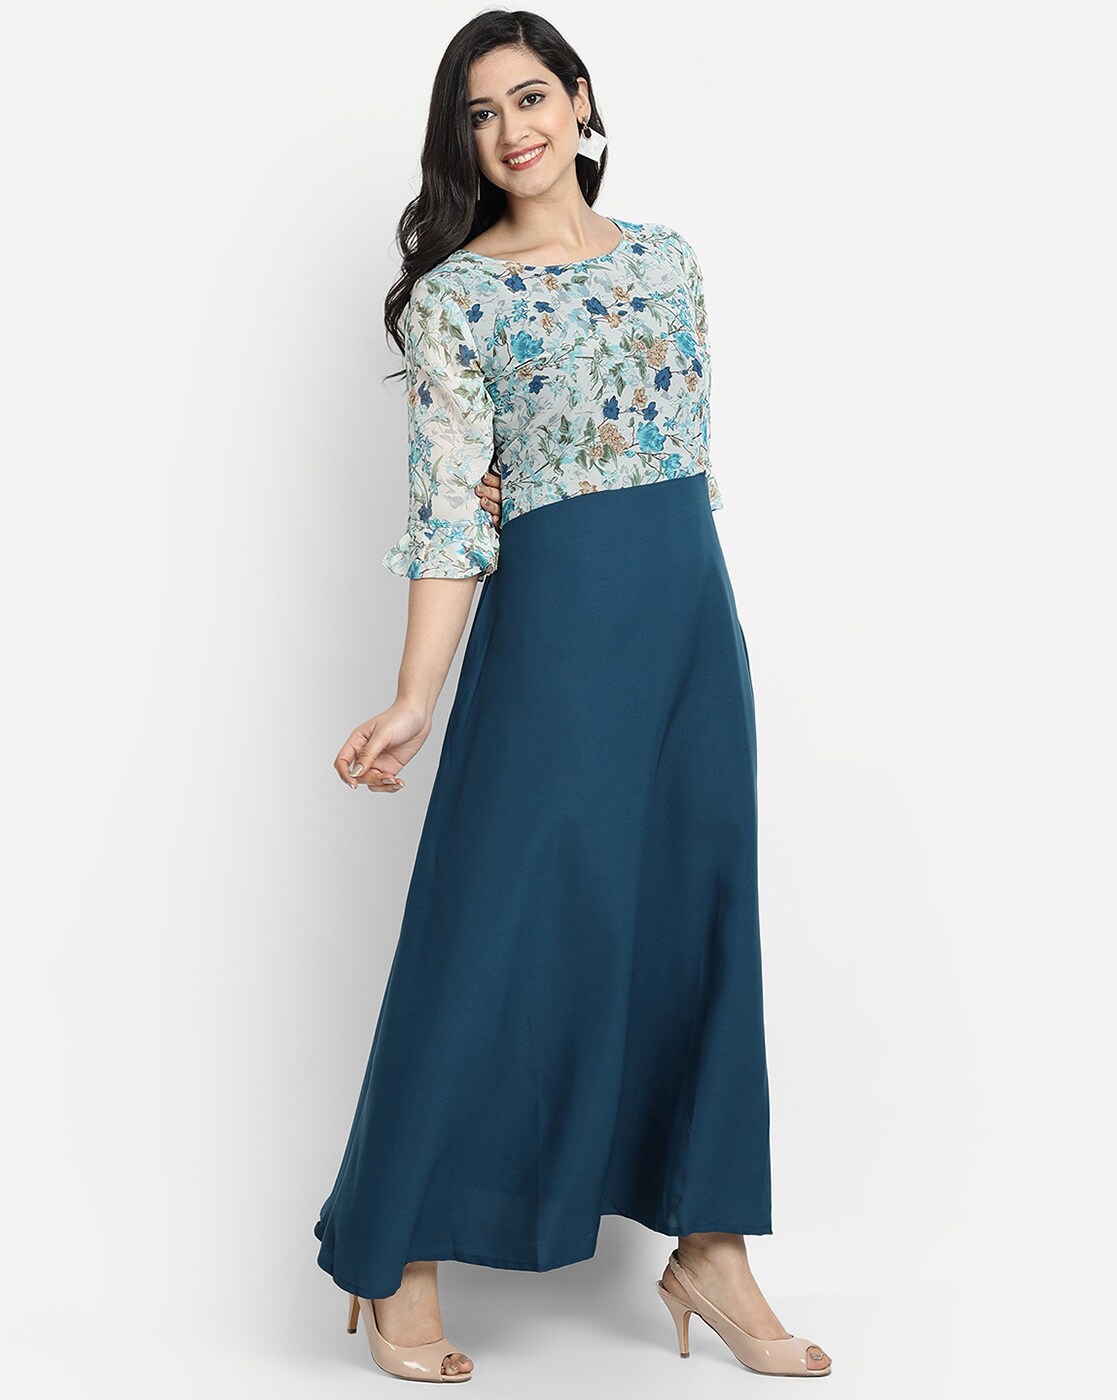 Kurtis + Jeans Outfits You Just Can't Miss! | Stylish dresses, Trendy dress  outfits, Stylish dresses for girls